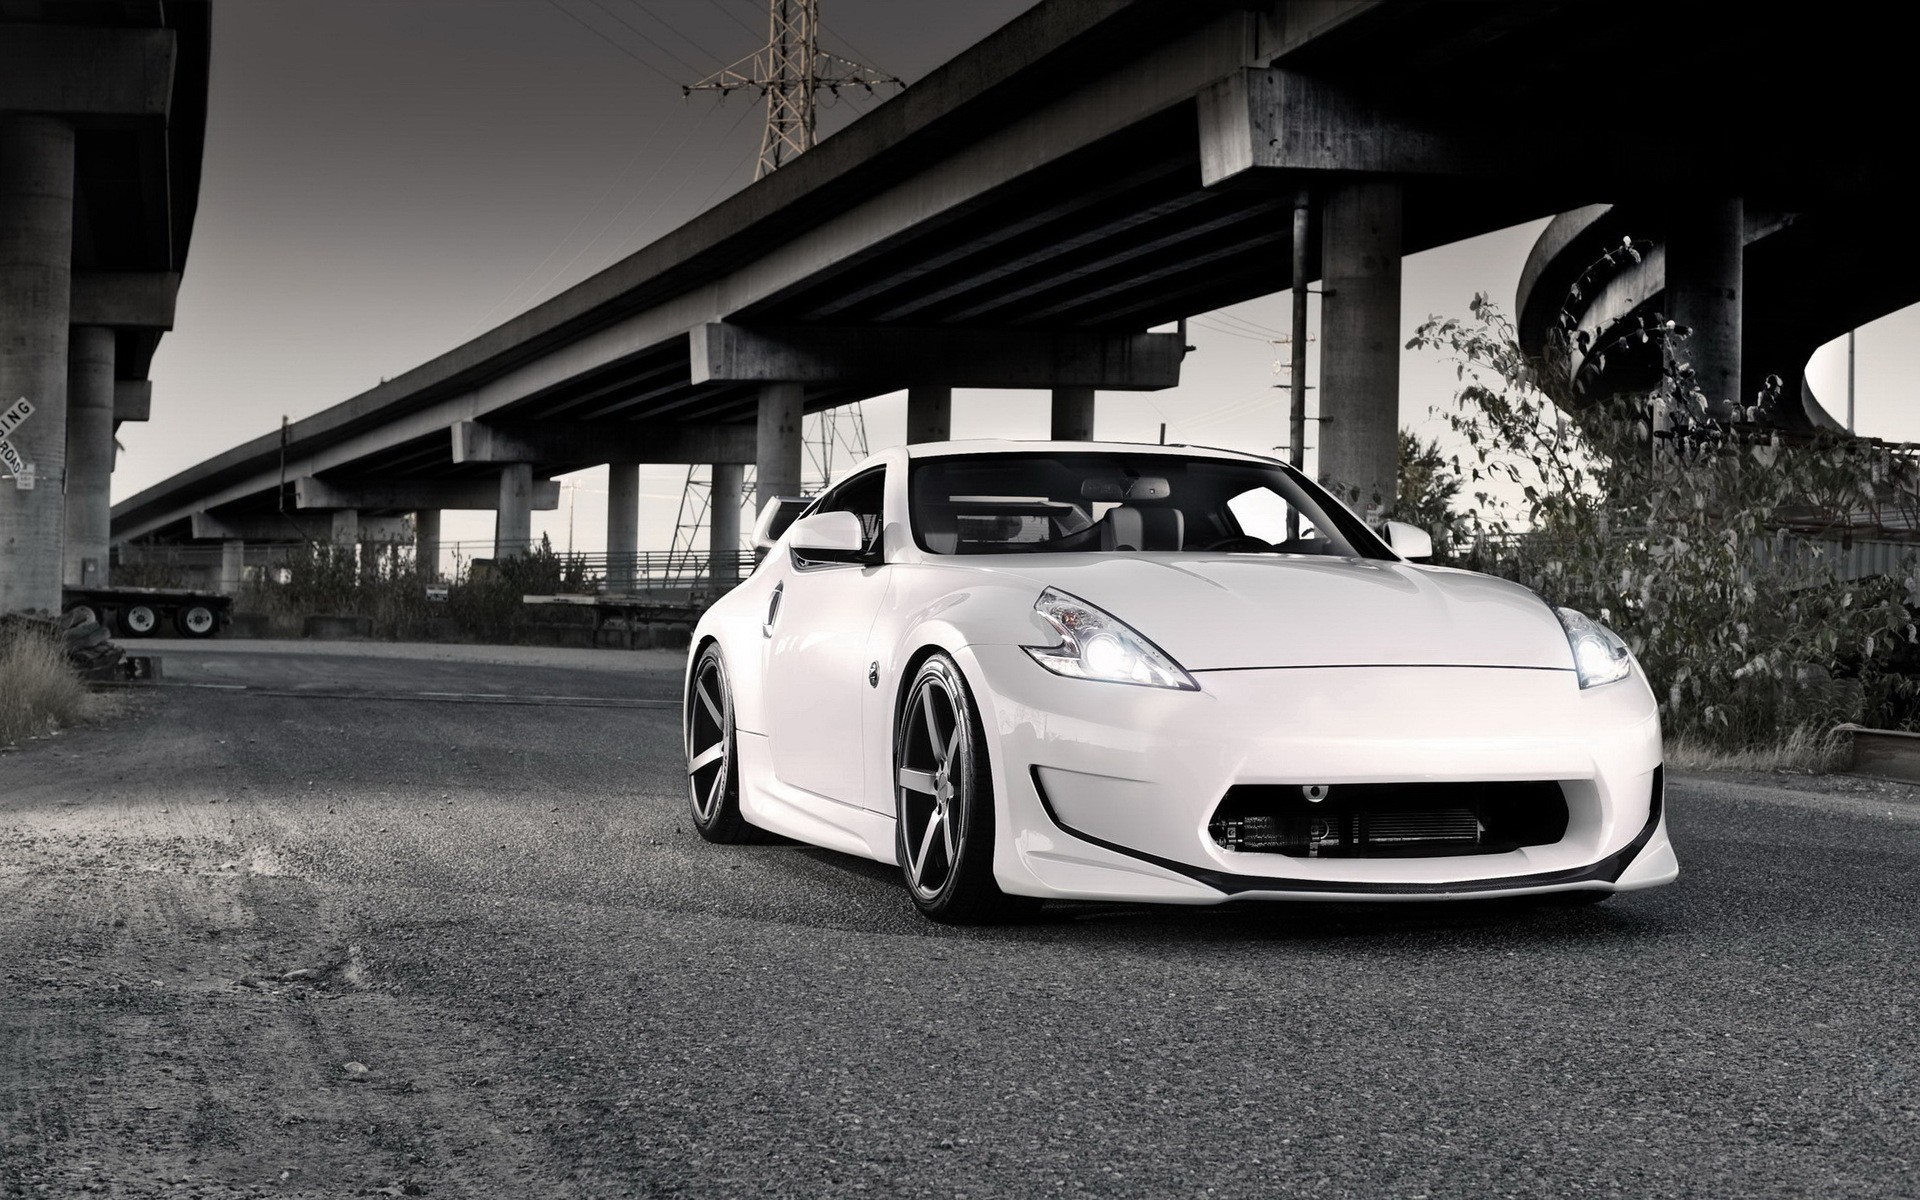 vehicles, Tuning, Nissan, 370z, Sports, Cars, White, Cars Wallpaper